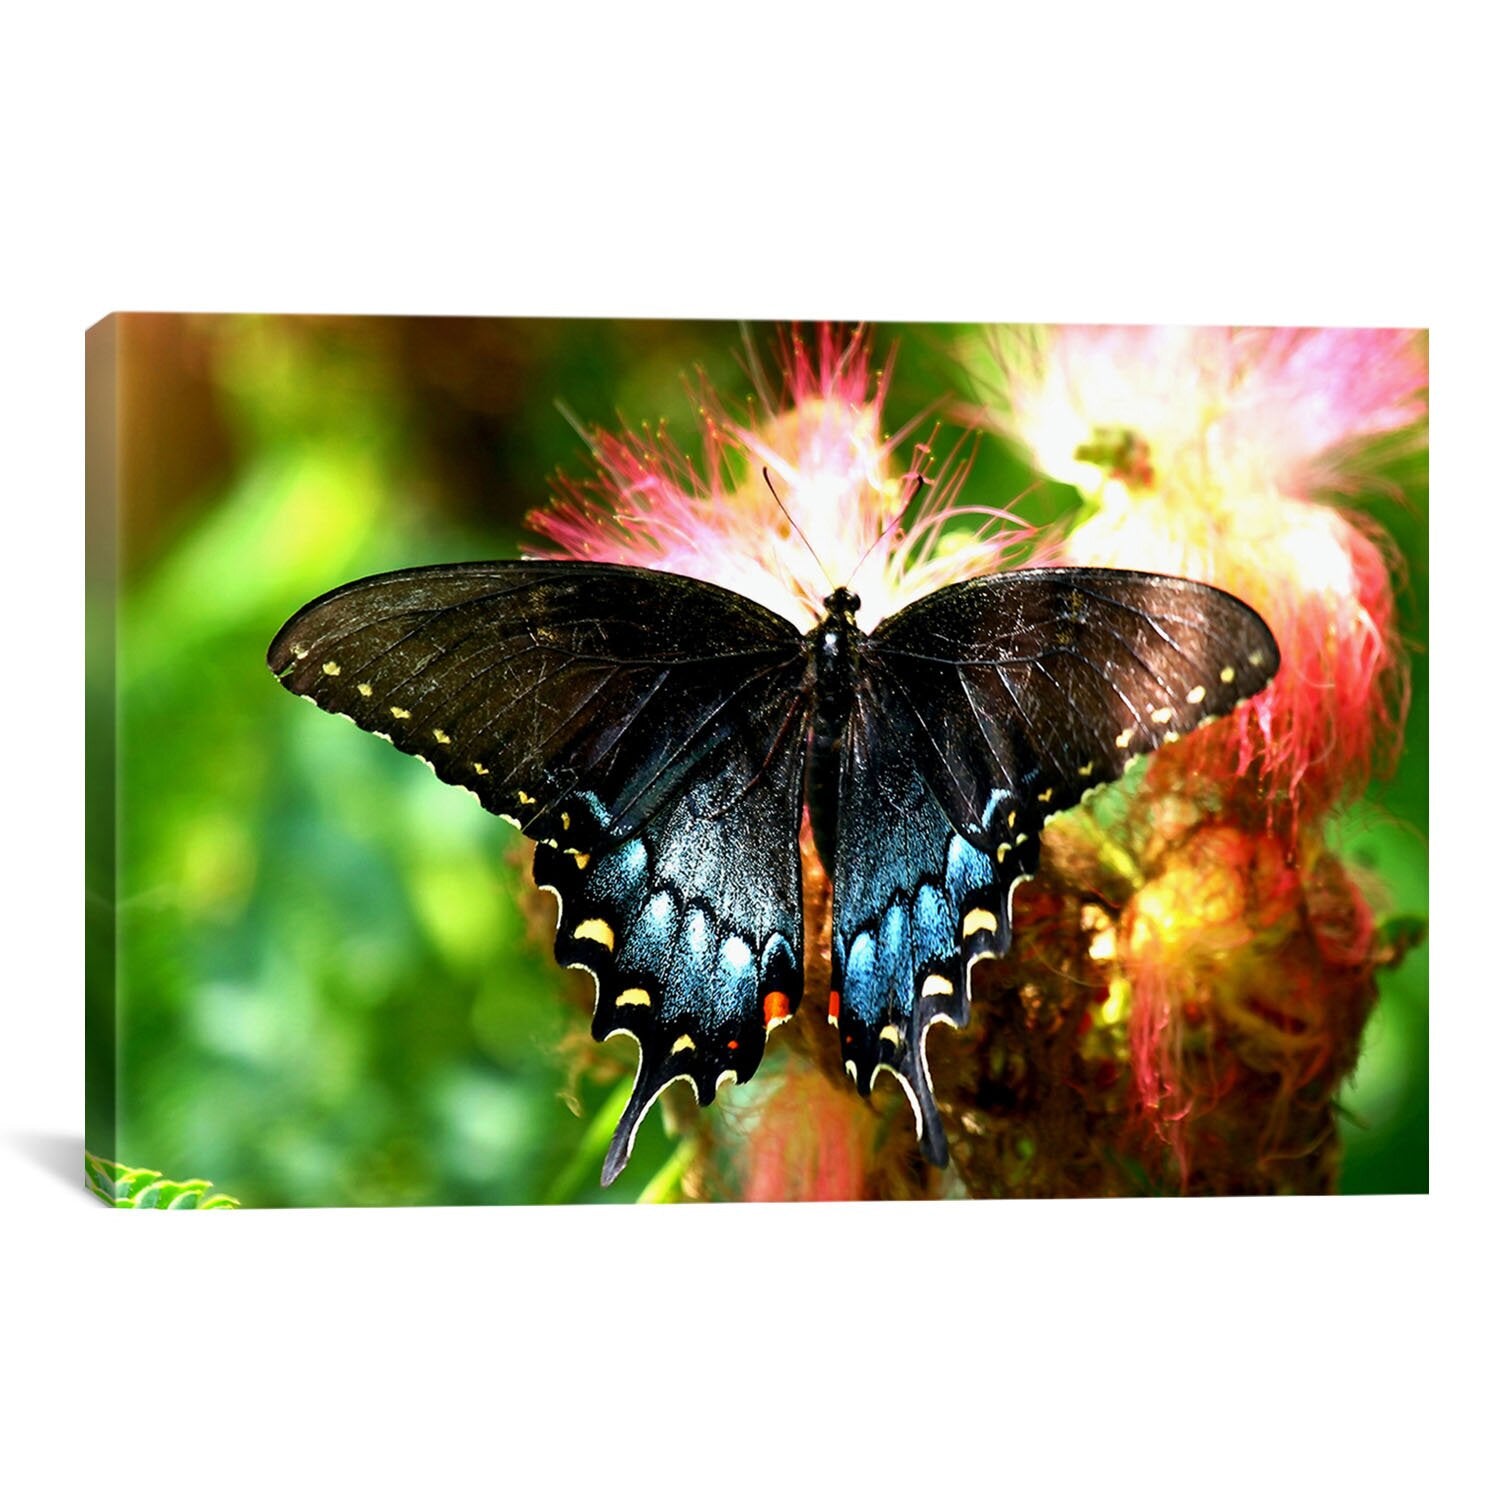 12" H x 18" W x 0.75" D 'Swallowtail Butterfly' Photograph on Canvas K6923